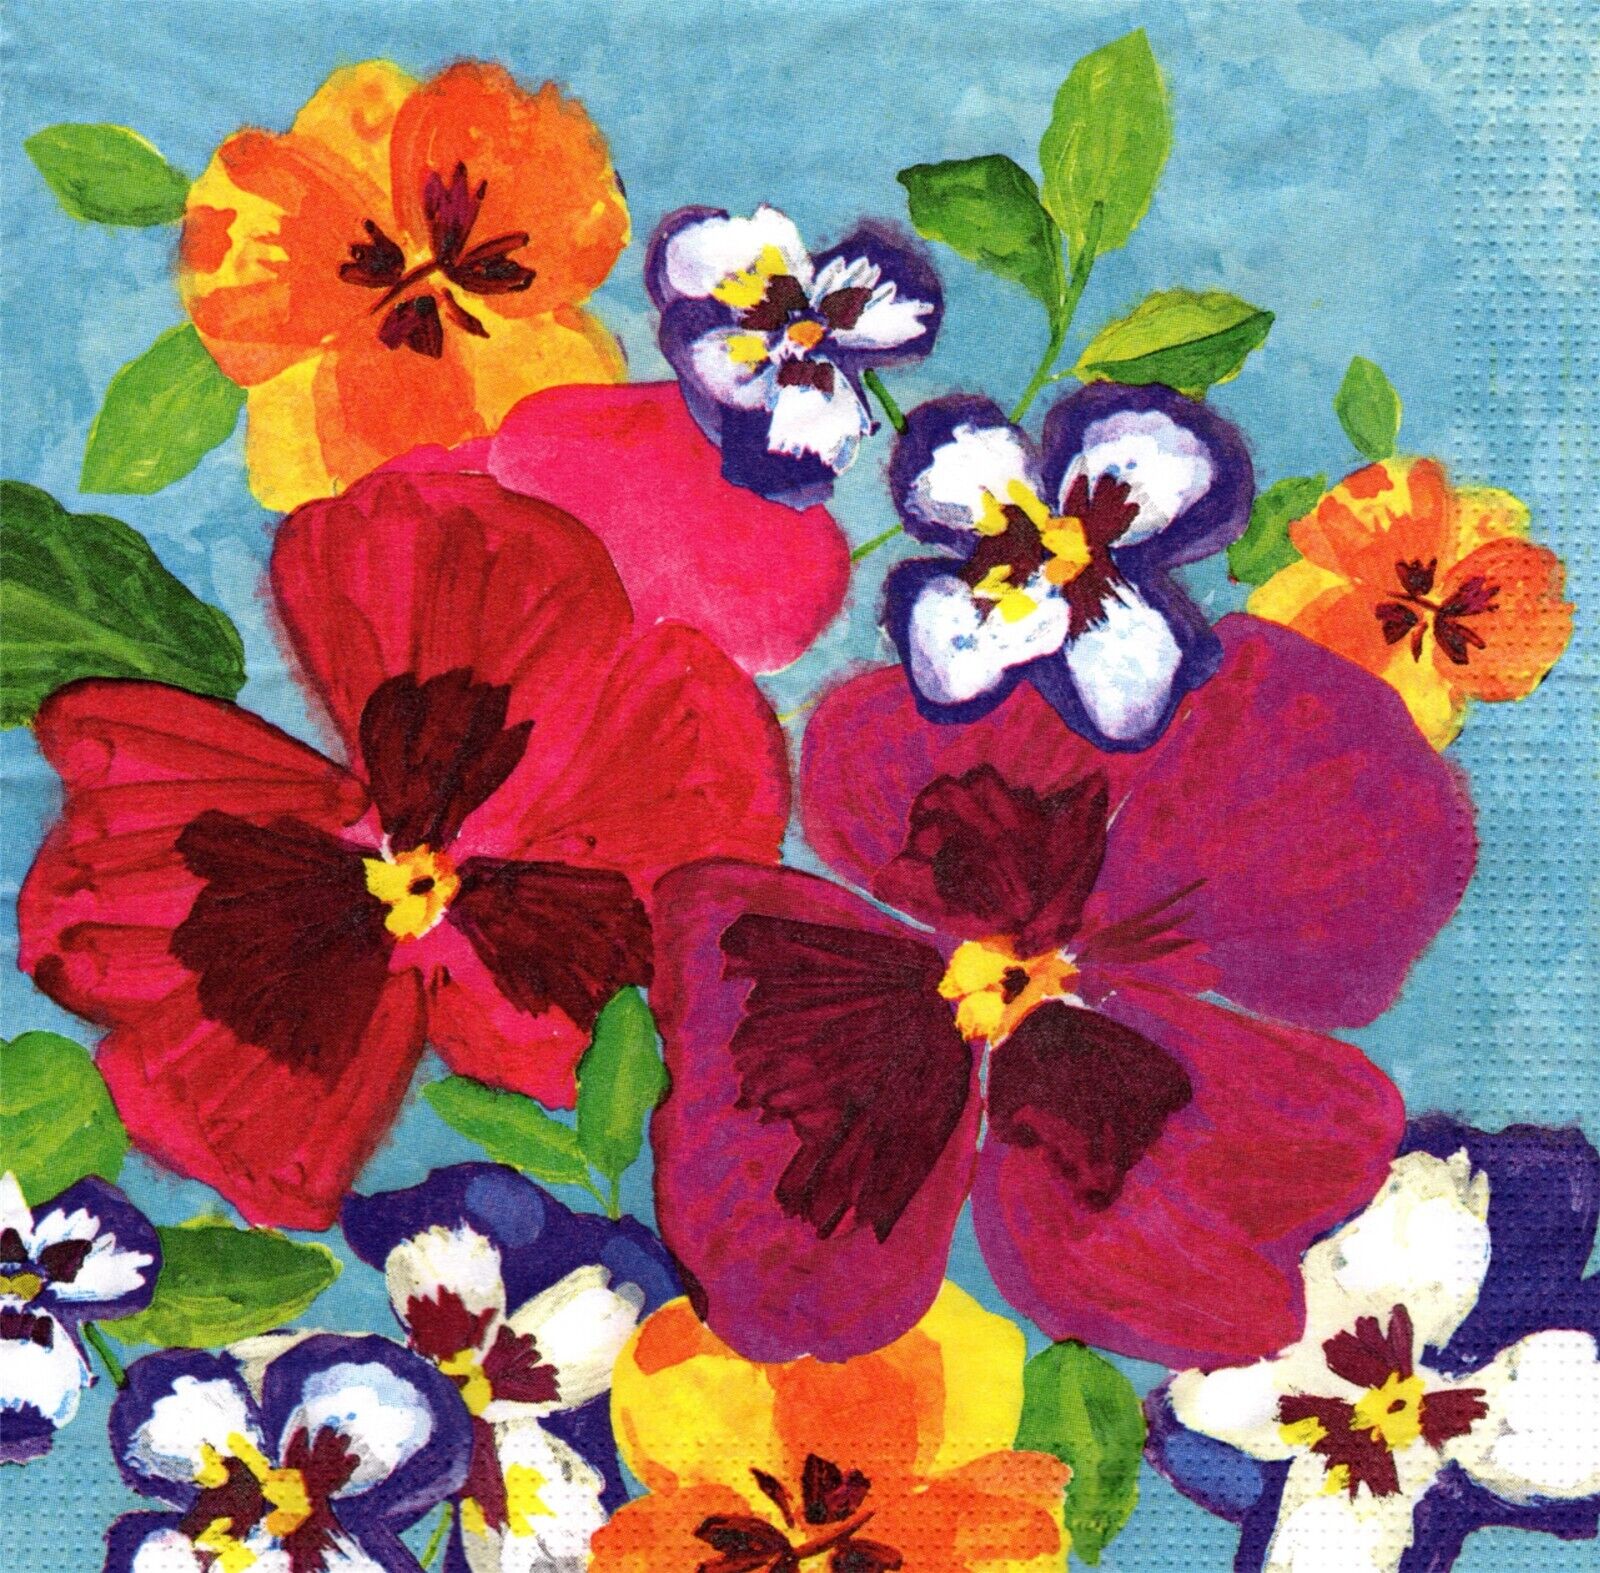 (2) Two Paper Lunch Napkins for Decoupage/Mixed Media - Pansy Power floral